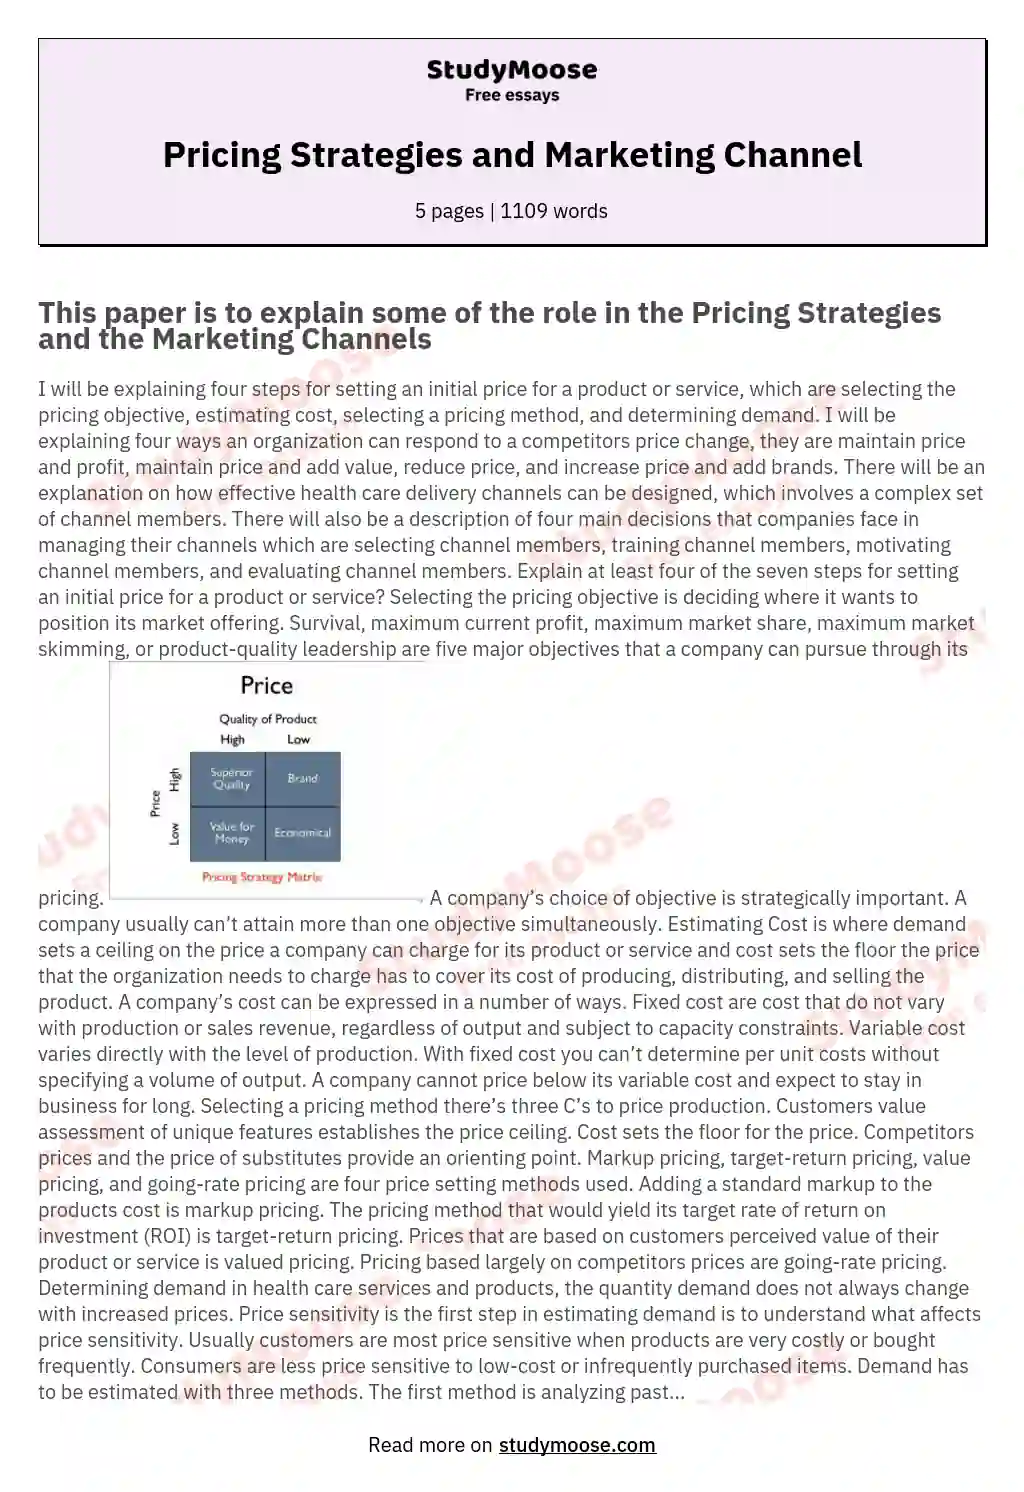 Pricing Strategies and Marketing Channel essay